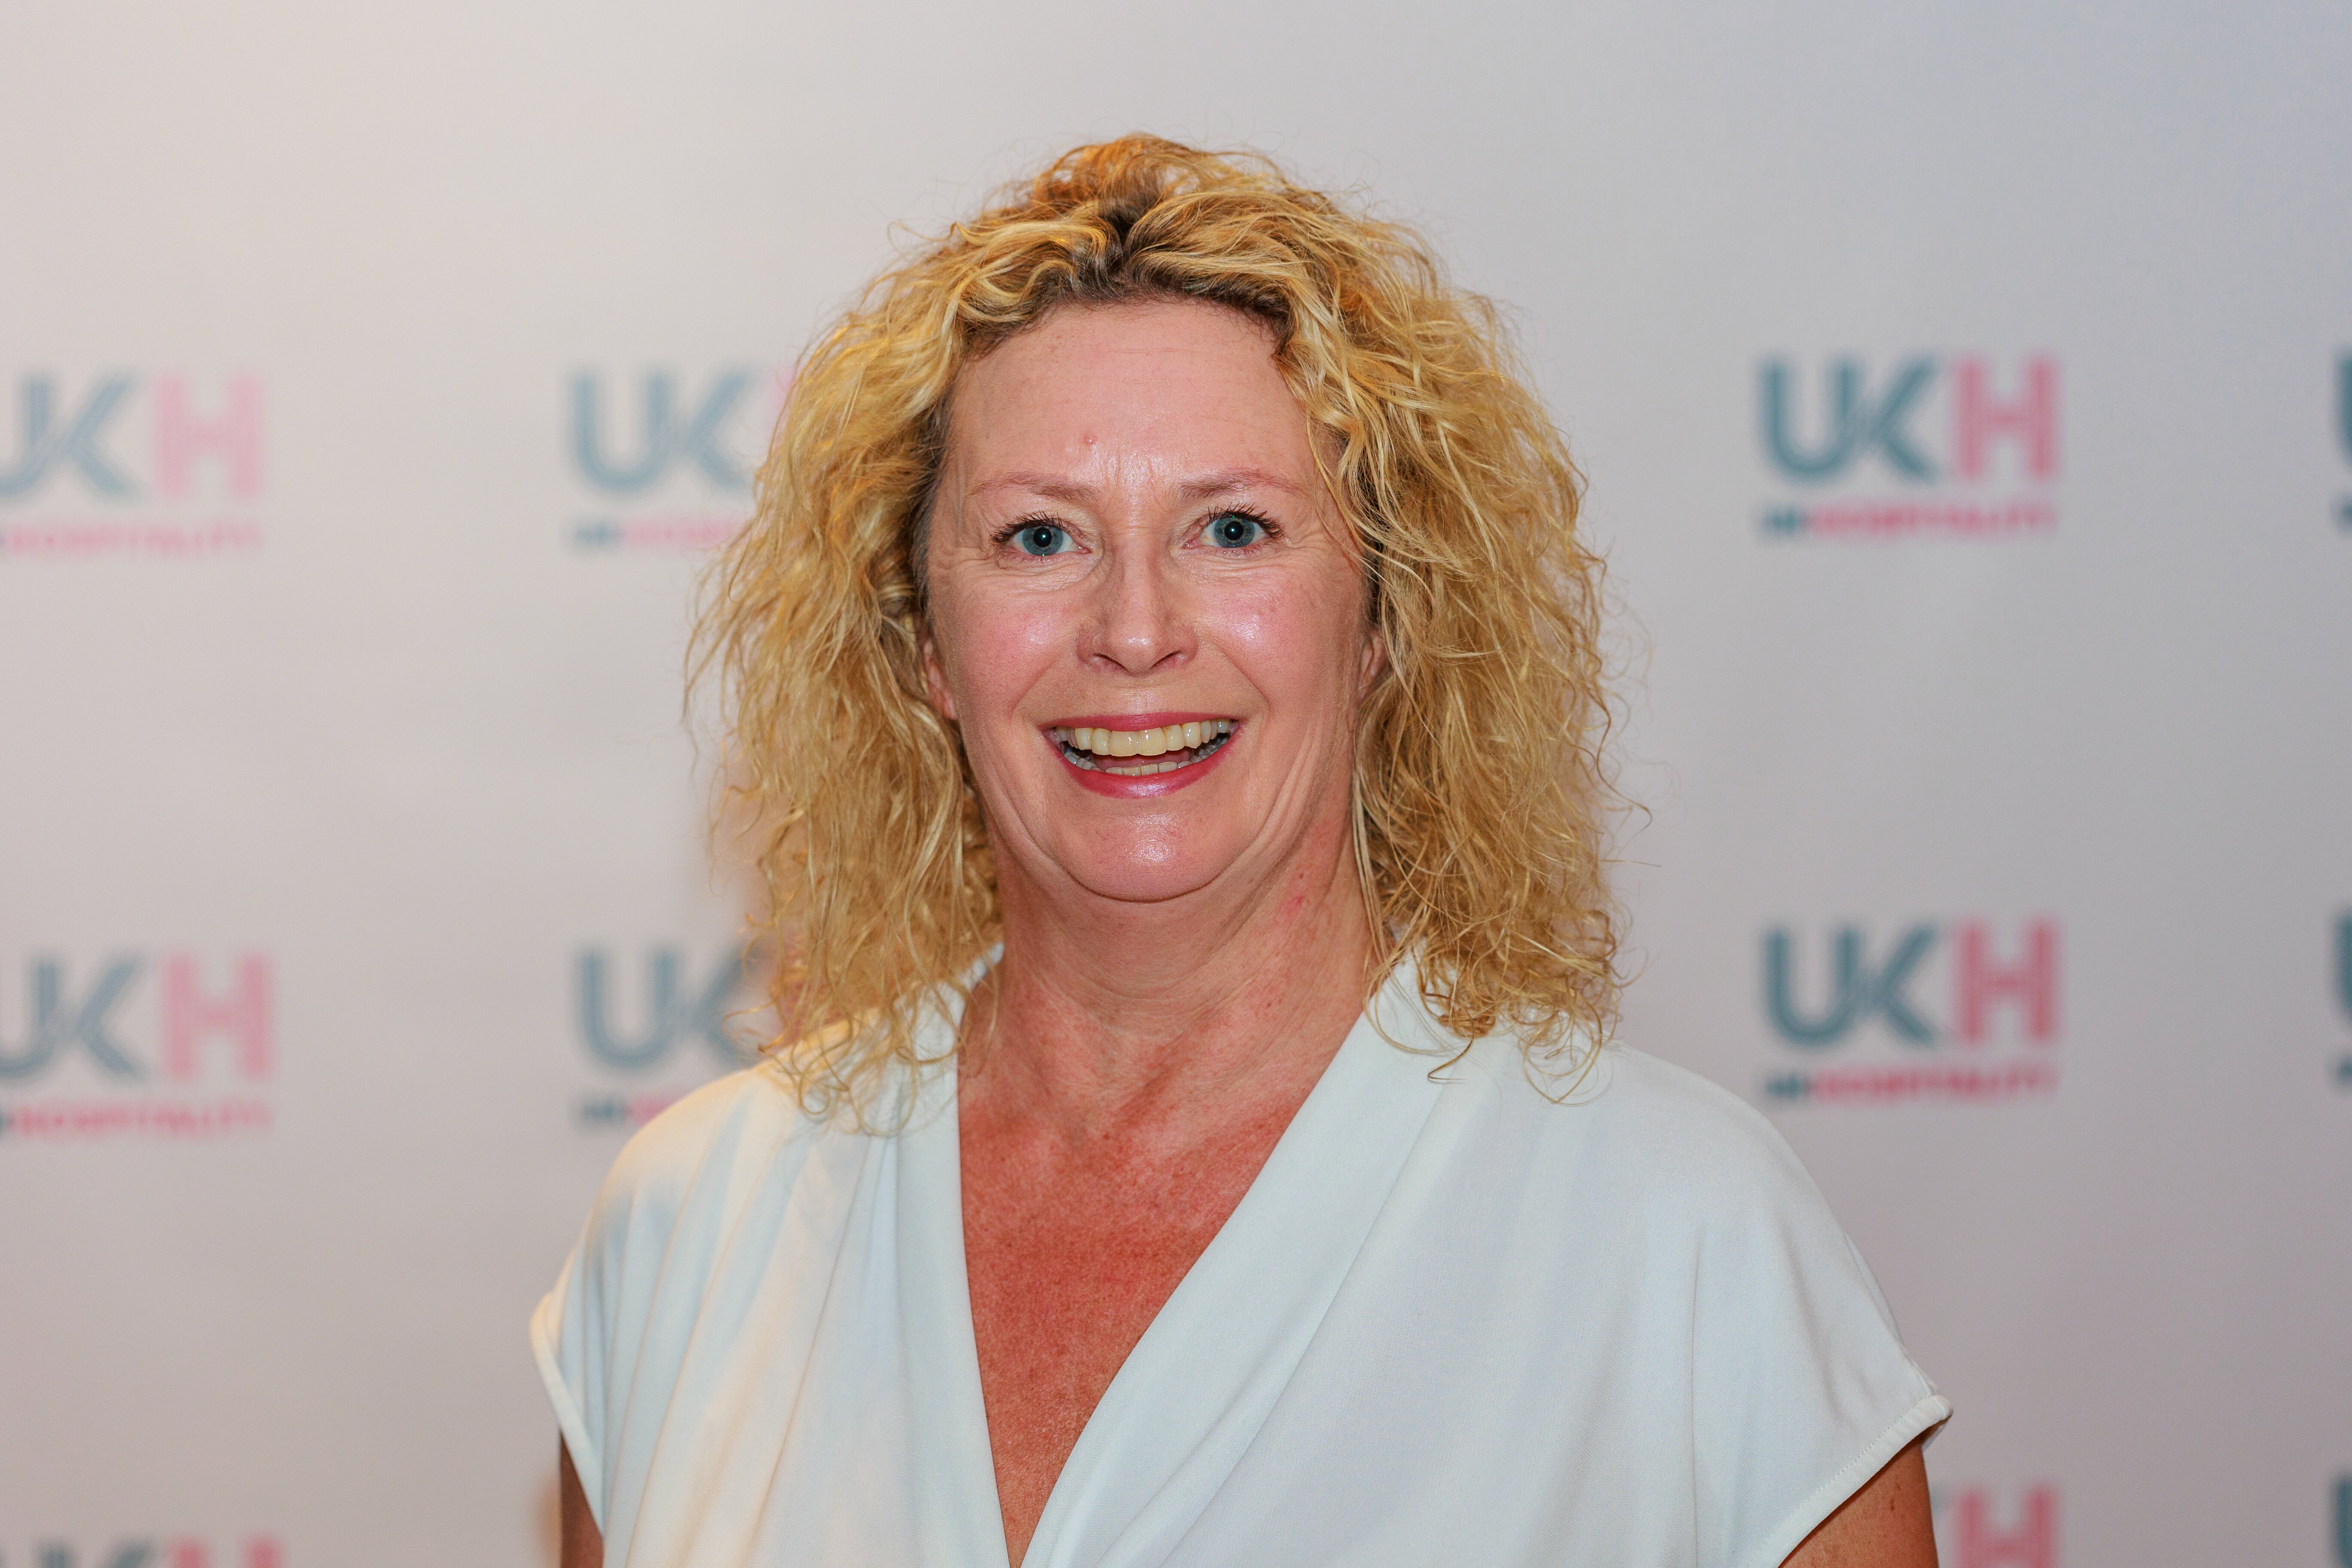 UKHospitality appoints skills director to tackle 'workforce crisis'